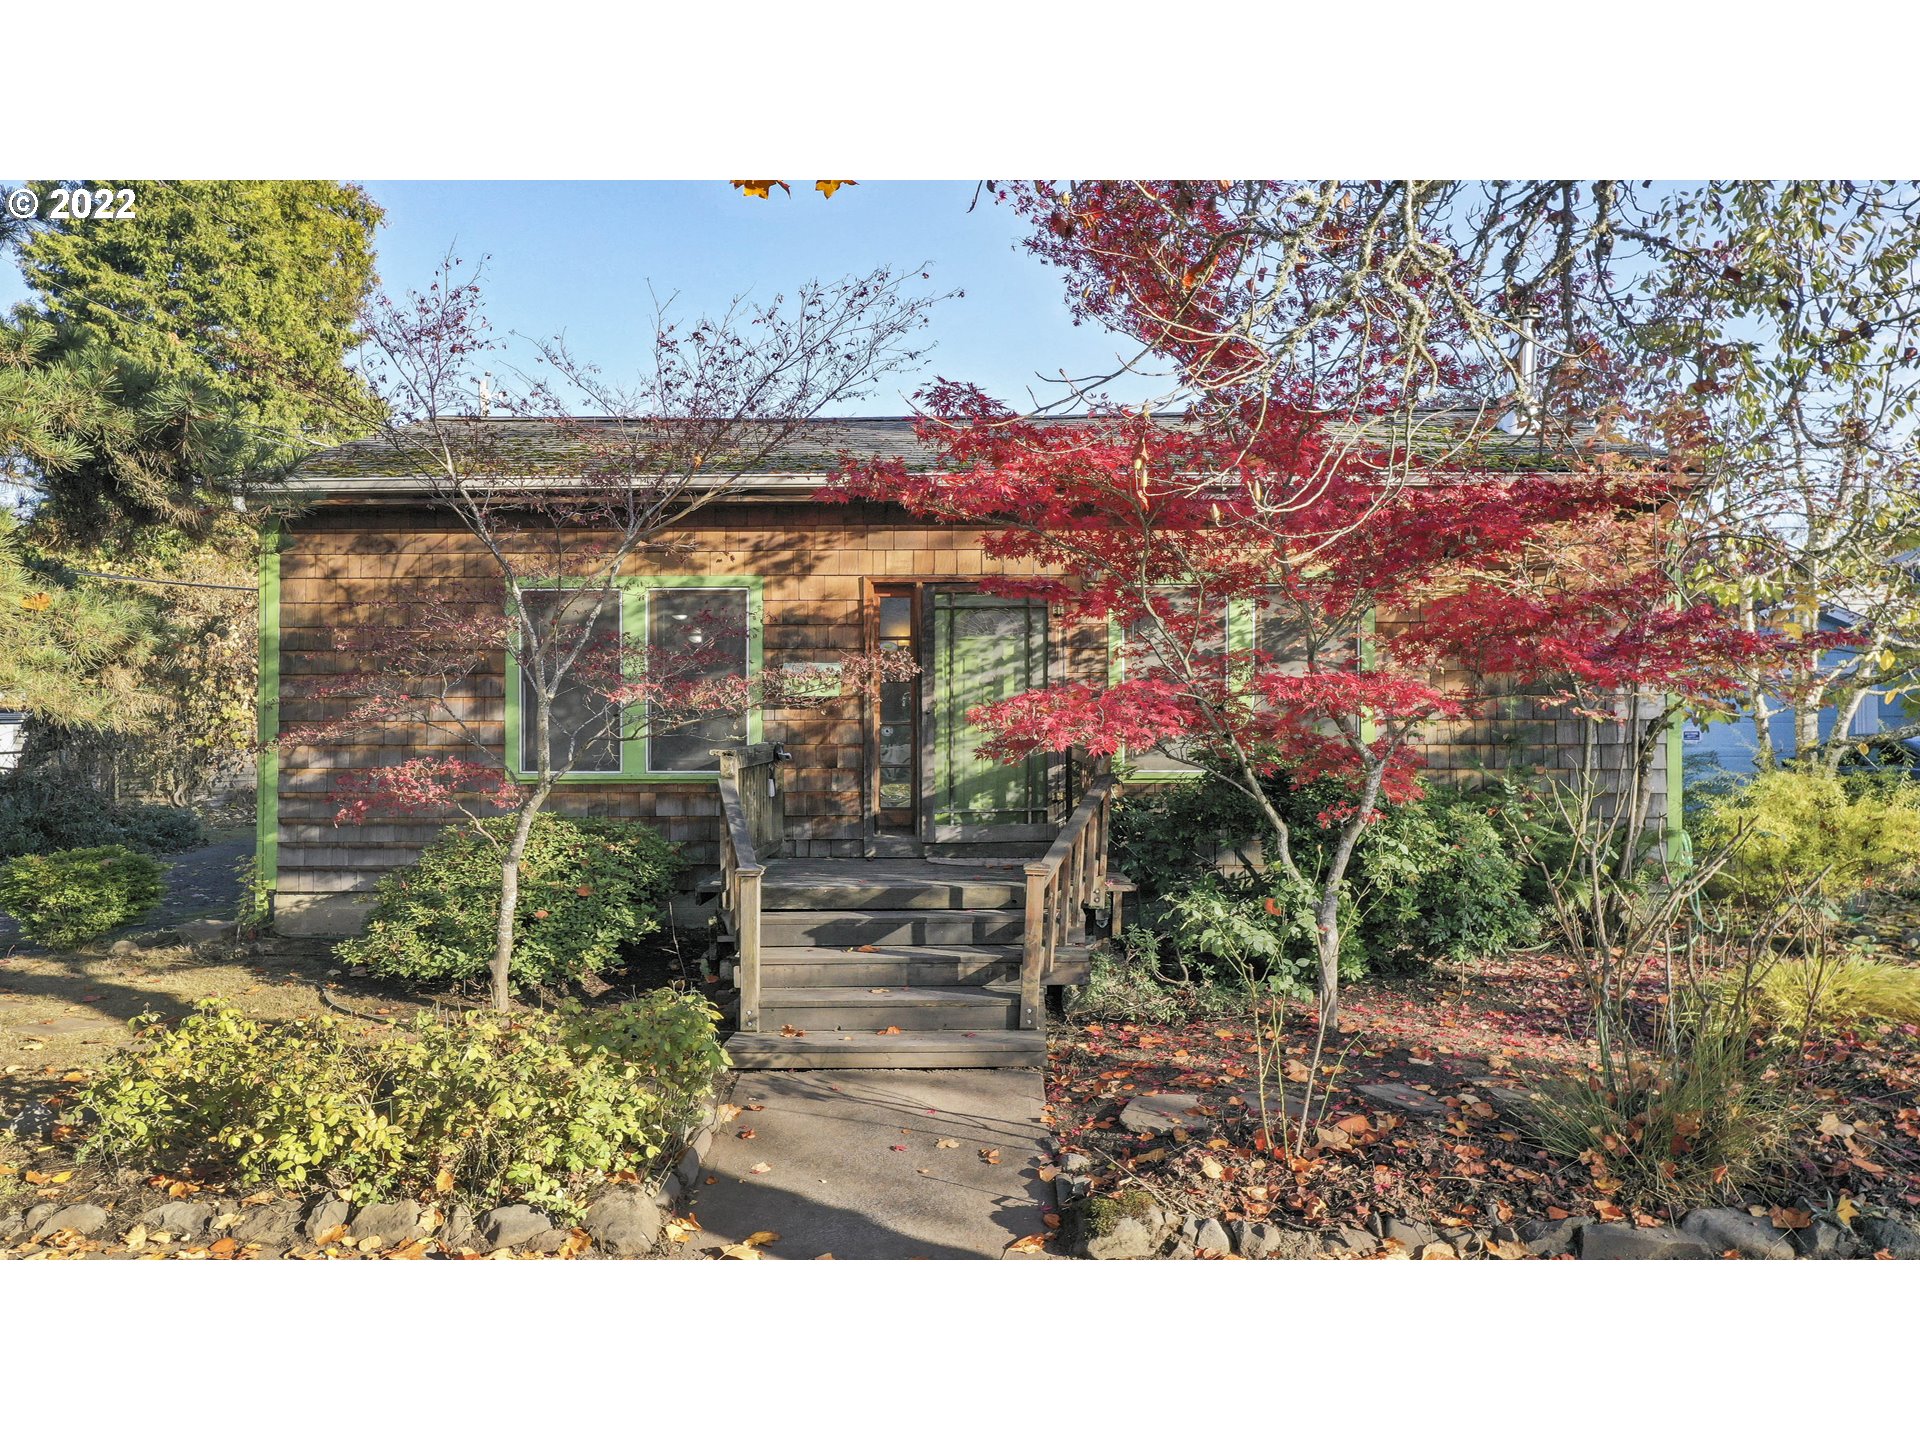 Super cute single level 2 bedroom cottage in great downtown neighborhood, walk to it all! Vaulted ceiling with skylight~walk in closet in 1 bedroom~wood floors~lot's of storage~Inside utilities~Private backyard~ new roof~4J schools